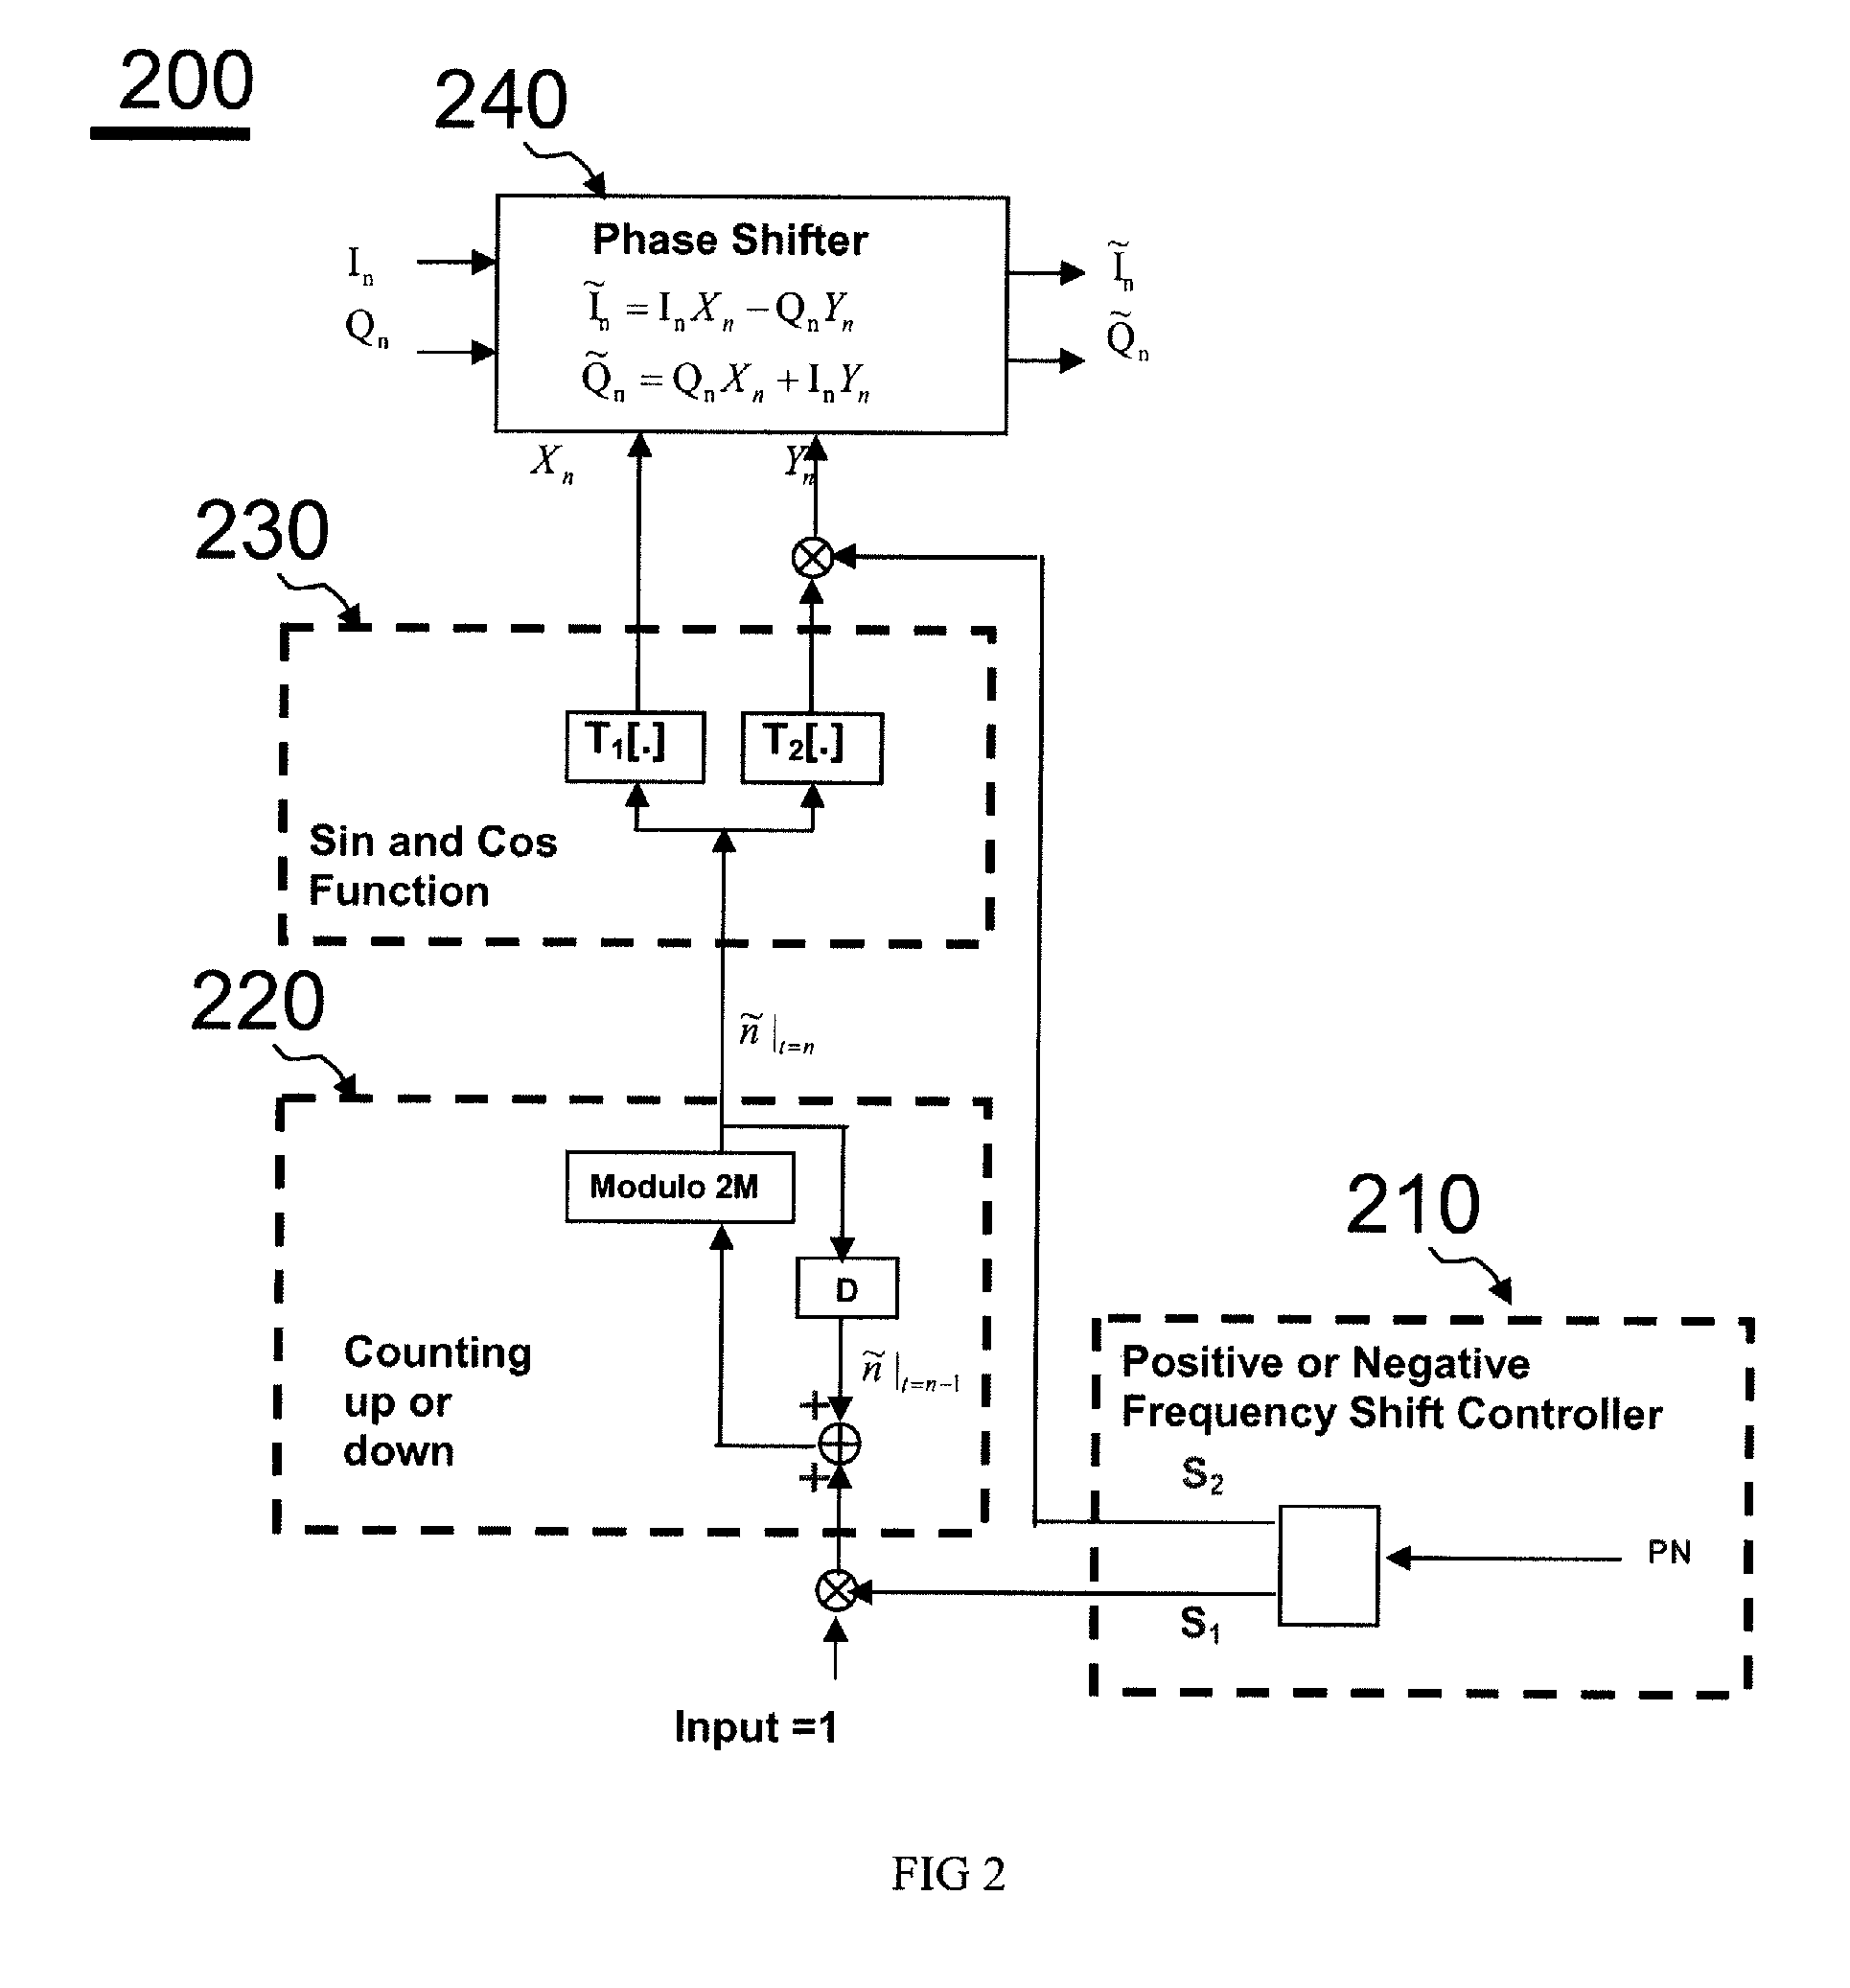 Arbitrary frequency shifter in communication systems